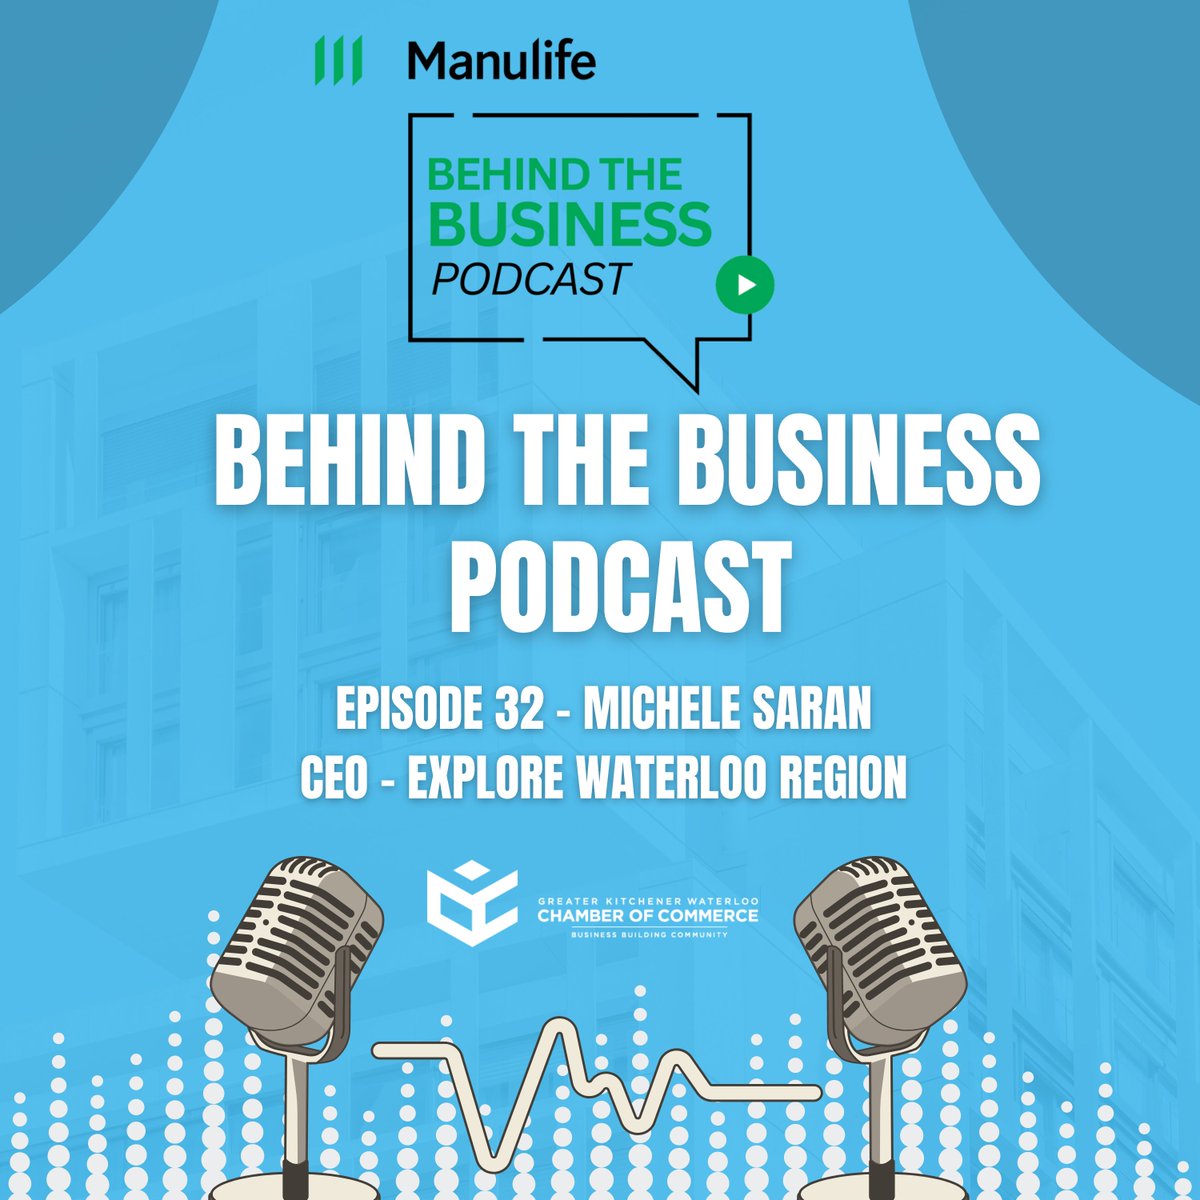 Hey everyone! Episode 32 of our Behind the Business Podcast is out now. Head to the link - greaterkwchamber.com/education/behi… and check out the awesome conversation we had with our special guest @MSCanada1201, Michele Saran. She's the CEO of @ExploreWR🙌 #podcast #kitchenerwaterloo